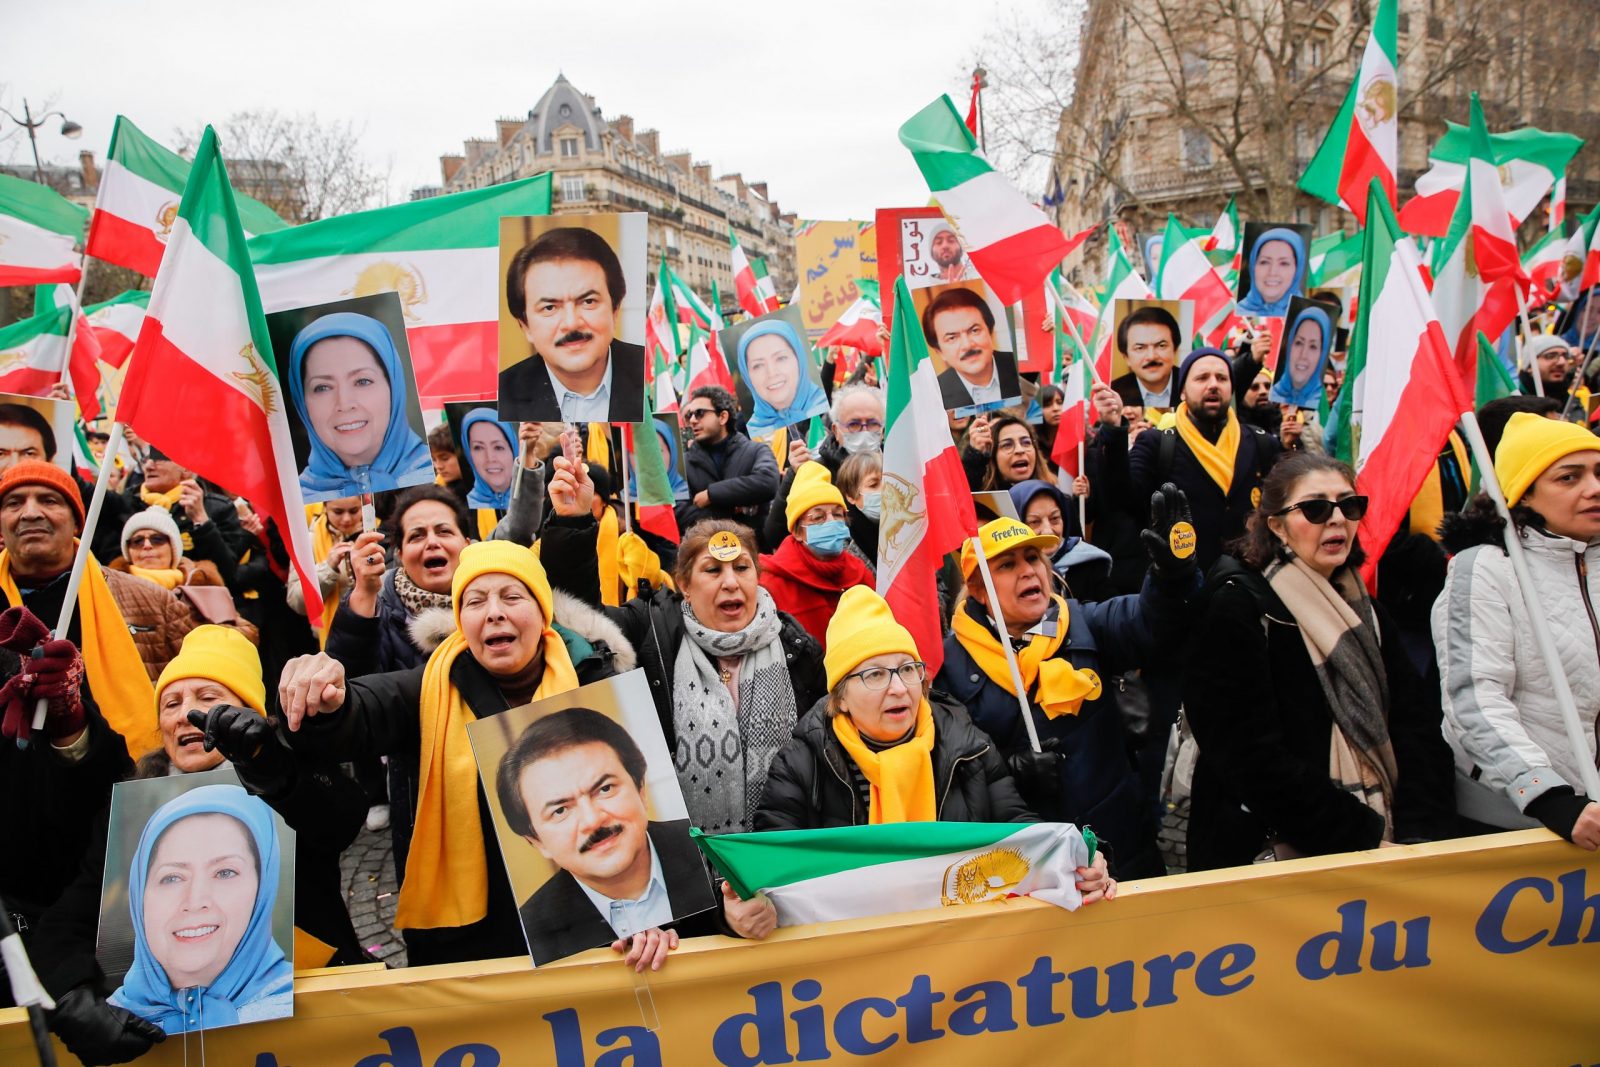 epa10463087 Supporters hold portrait of Masud Rajavi (R), one of the leaders of the  People's Mojahedin Organization of Iran, and Maryam Rajavi (L), President of the Iranian National Council of Resistance, during a demonstration on the 44th anniversary of the Iranian revolution against Shahh Reza Pahlavi, in Paris, France, 12 February 2023. The protesters rejected the Shah's dictatorshipin the then Imperial State of Iran from 16 September 1941 until he was overthrown in the Iranian Revolution on 11 February 1979, and the following mullahs' theocracy and called for a democratic and secular government in Iran.  EPA/TERESA SUAREZ